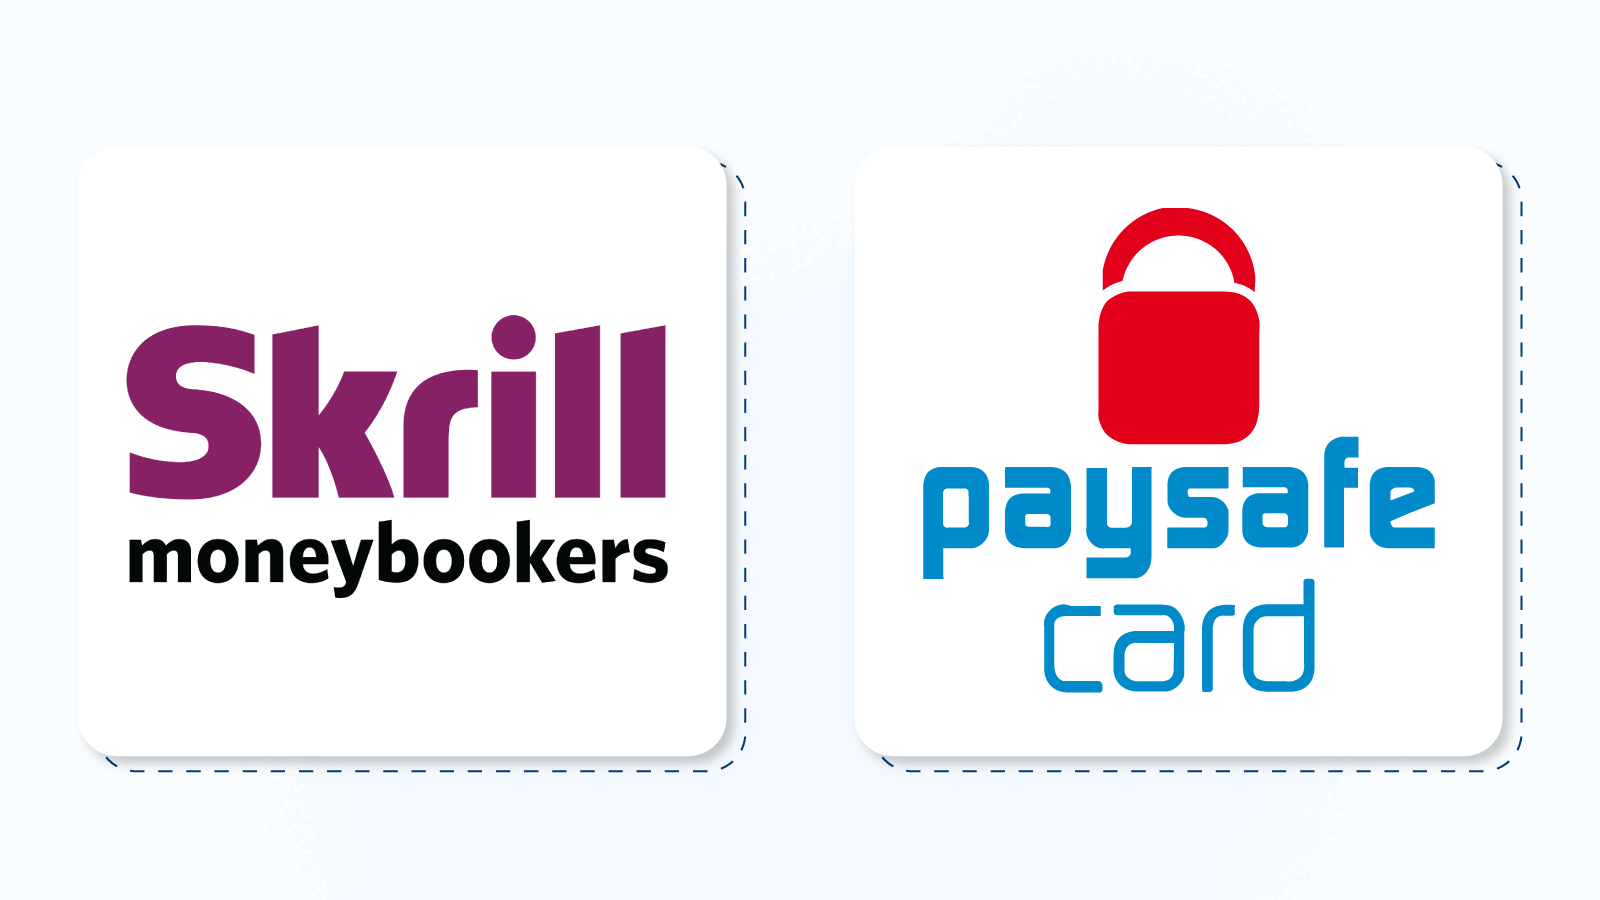 Skrill and Paysafe